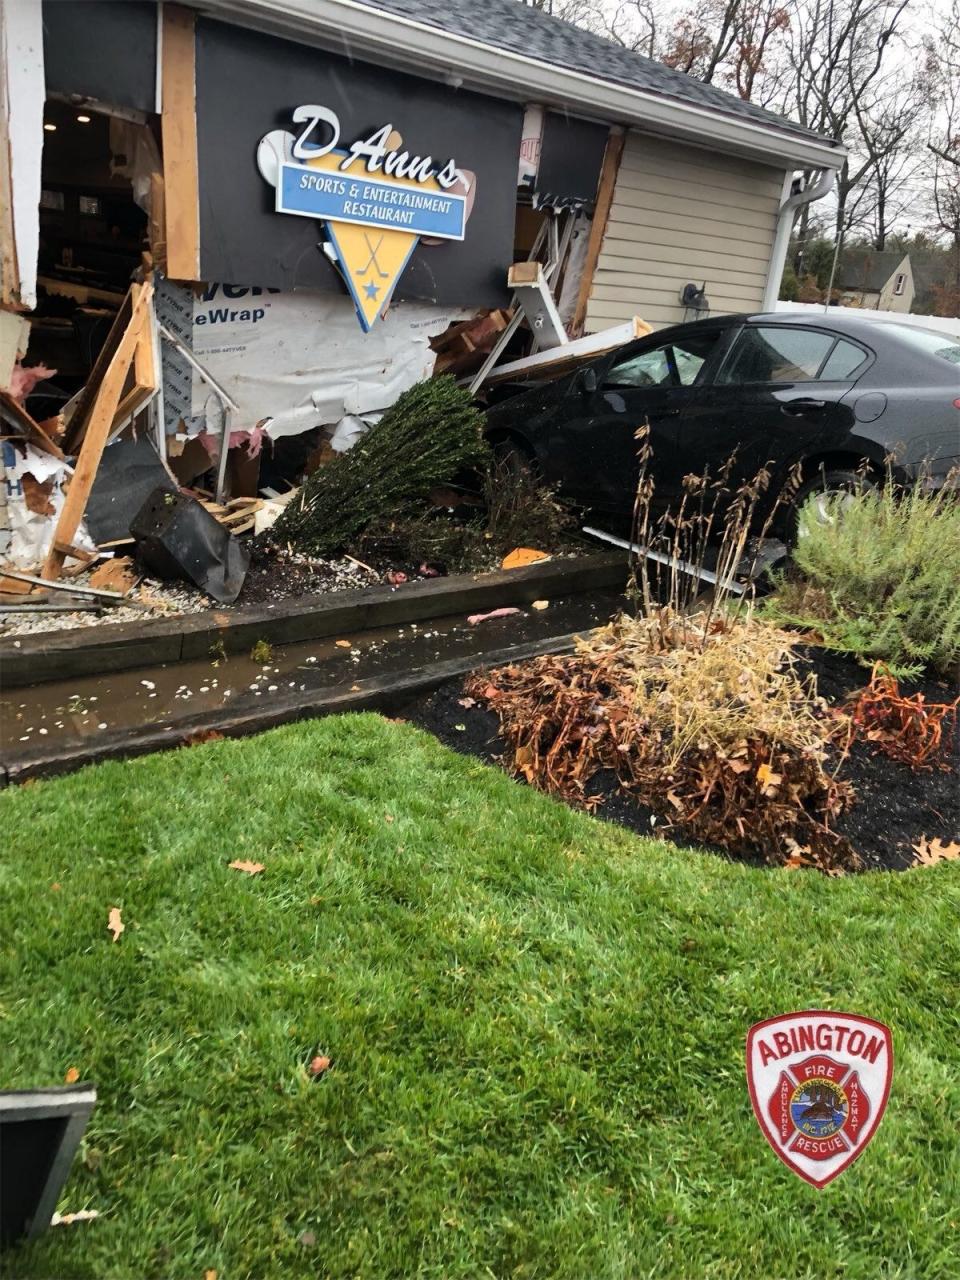 A car crashed into the side of D'Ann's restaurant in Abington on Monday morning, Nov. 22, 2021, before it opened for the day.